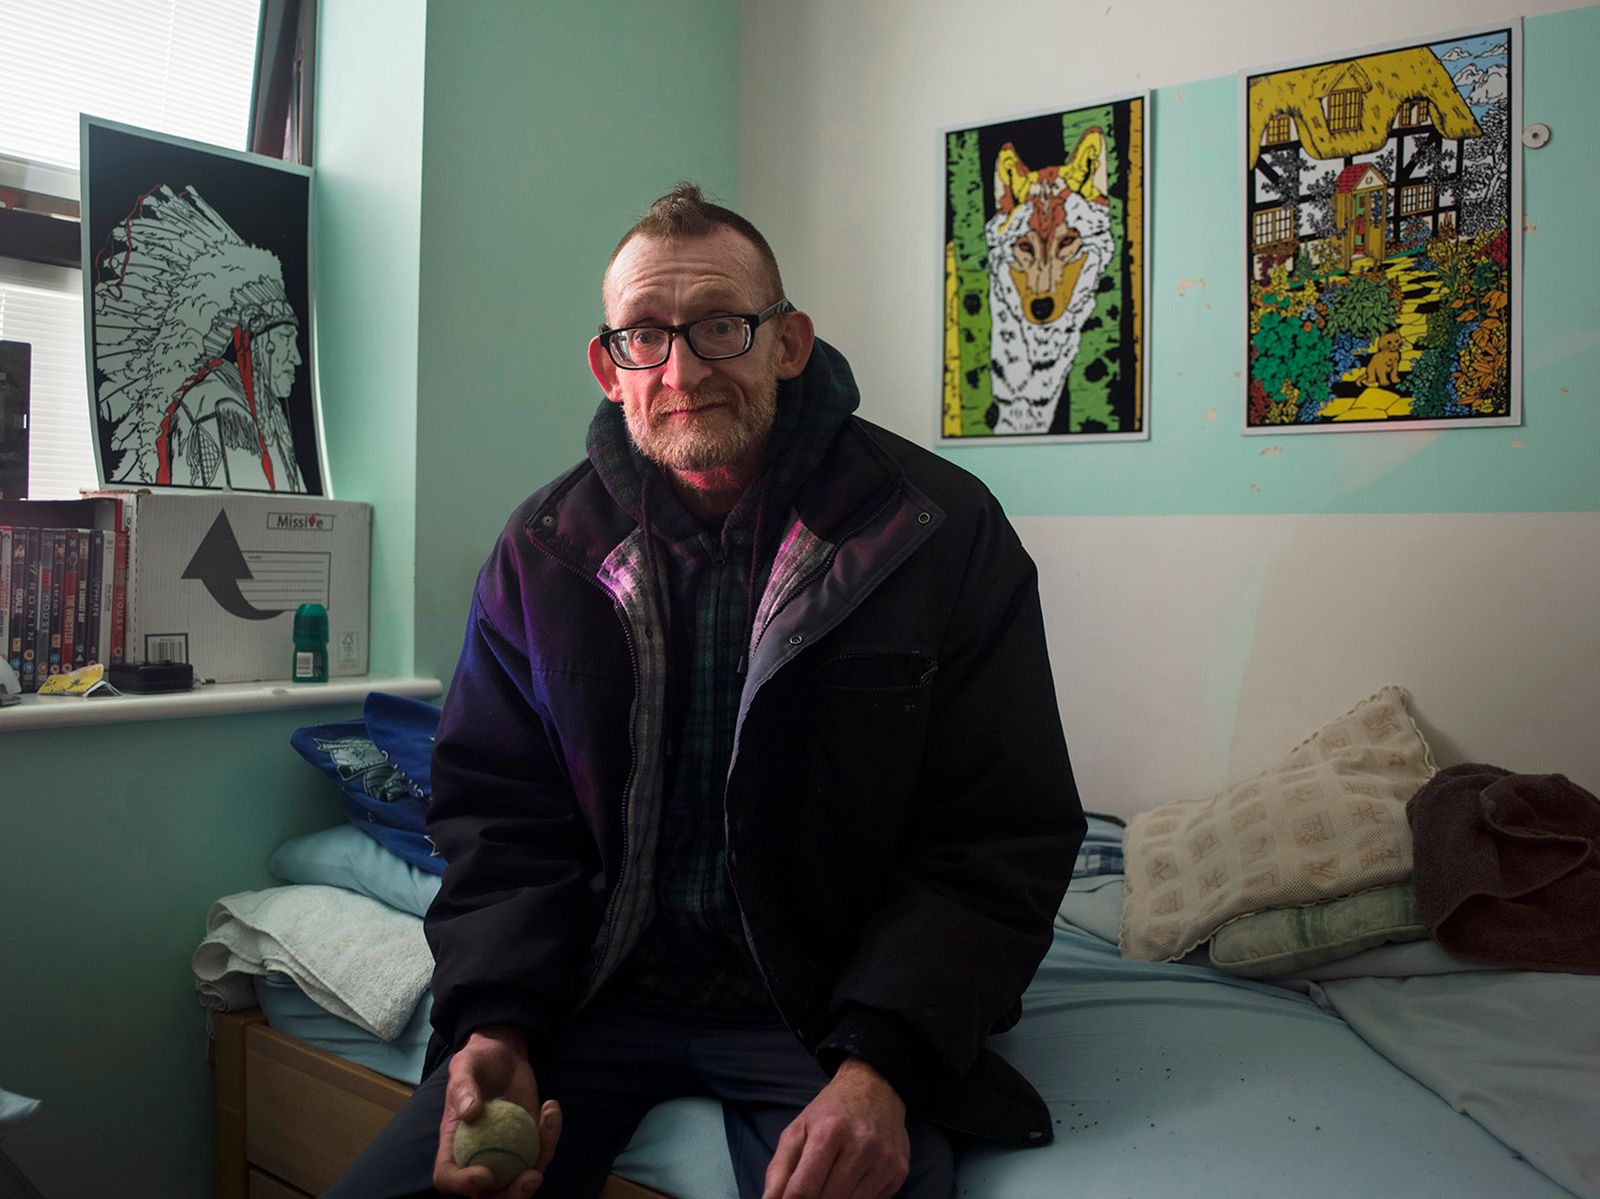 © Polly Braden - Roy in his bedroom at the secure hospital